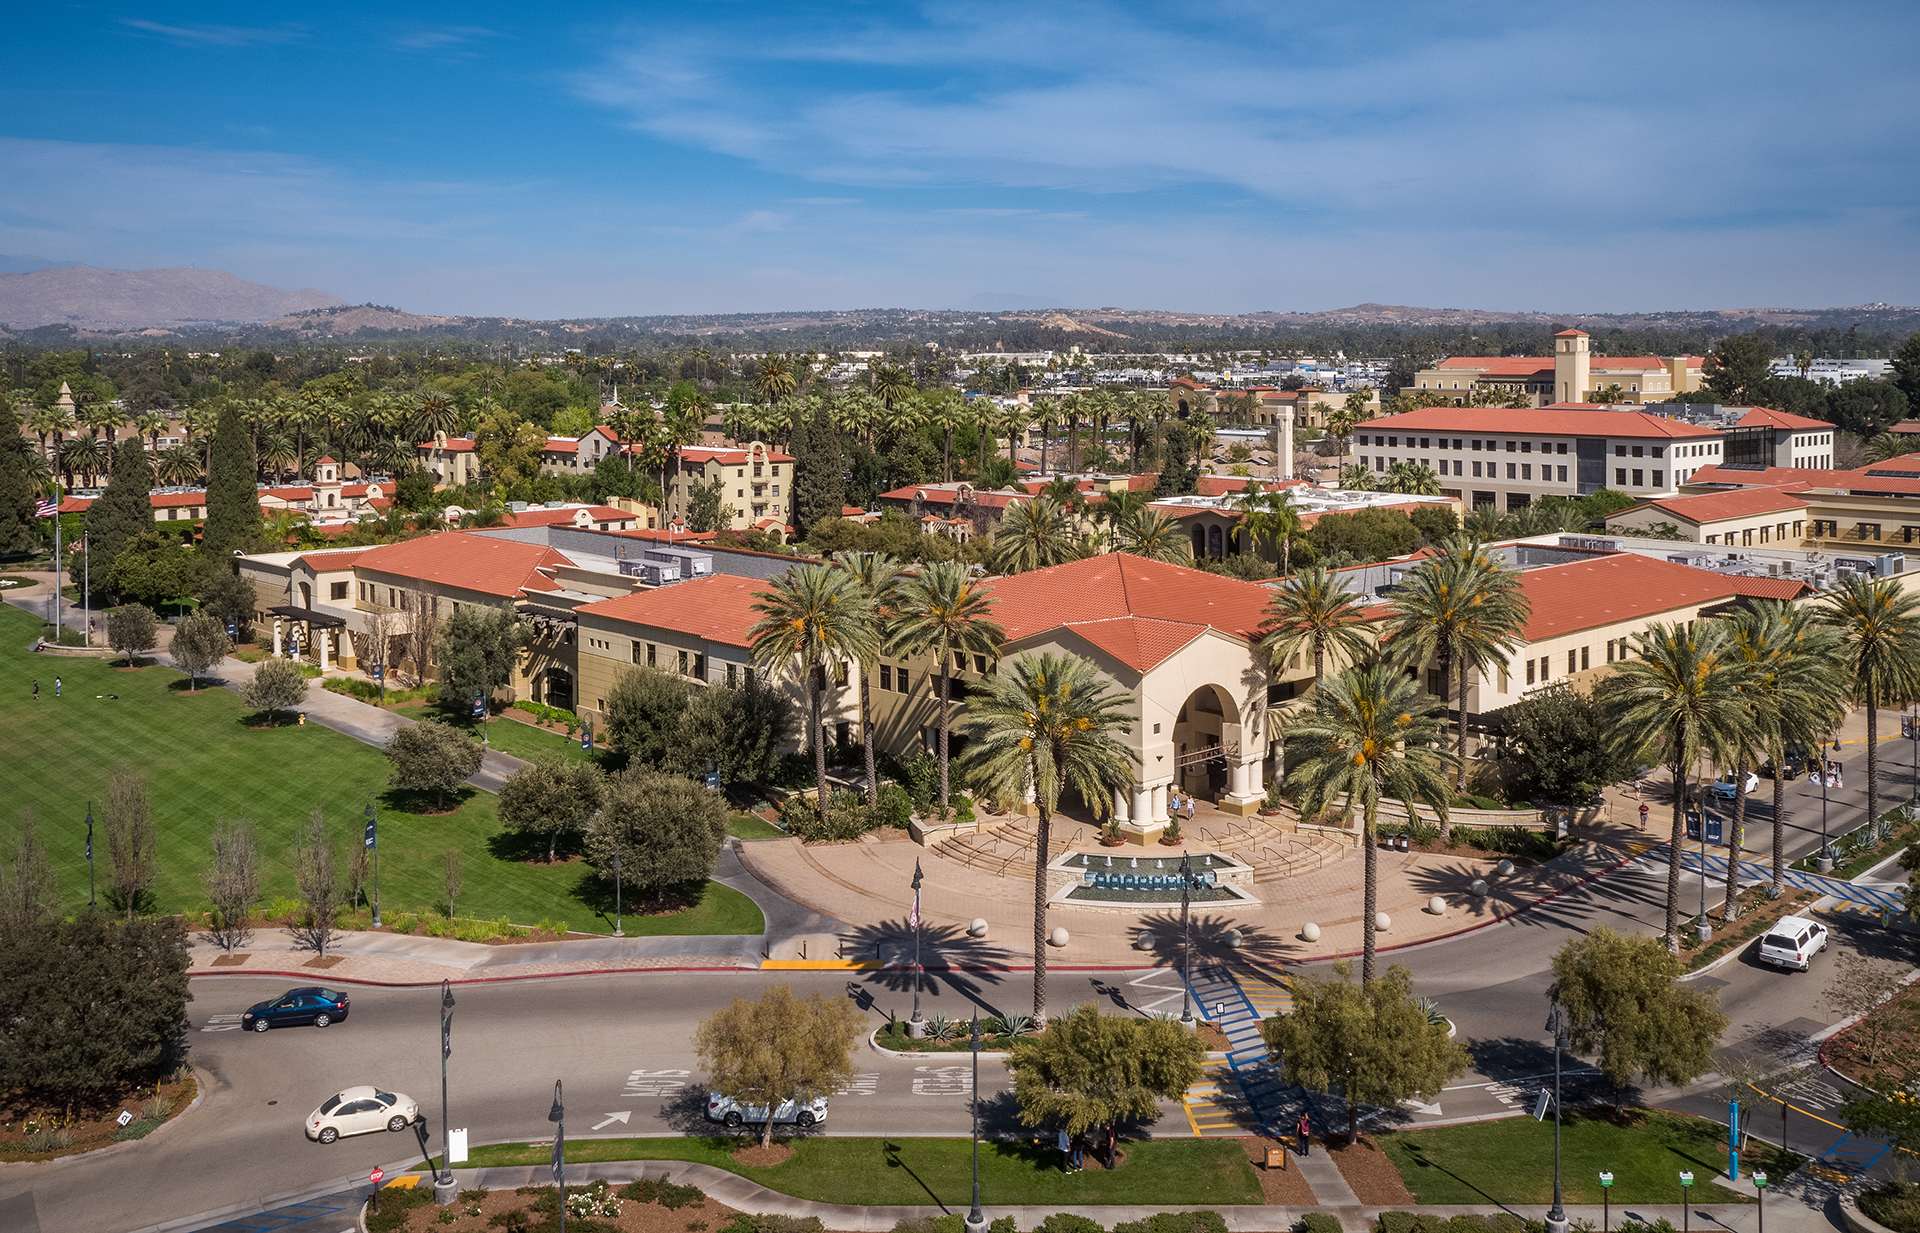 Fall 2018 Cbu Enrollment Tops 10 000 For First Time News